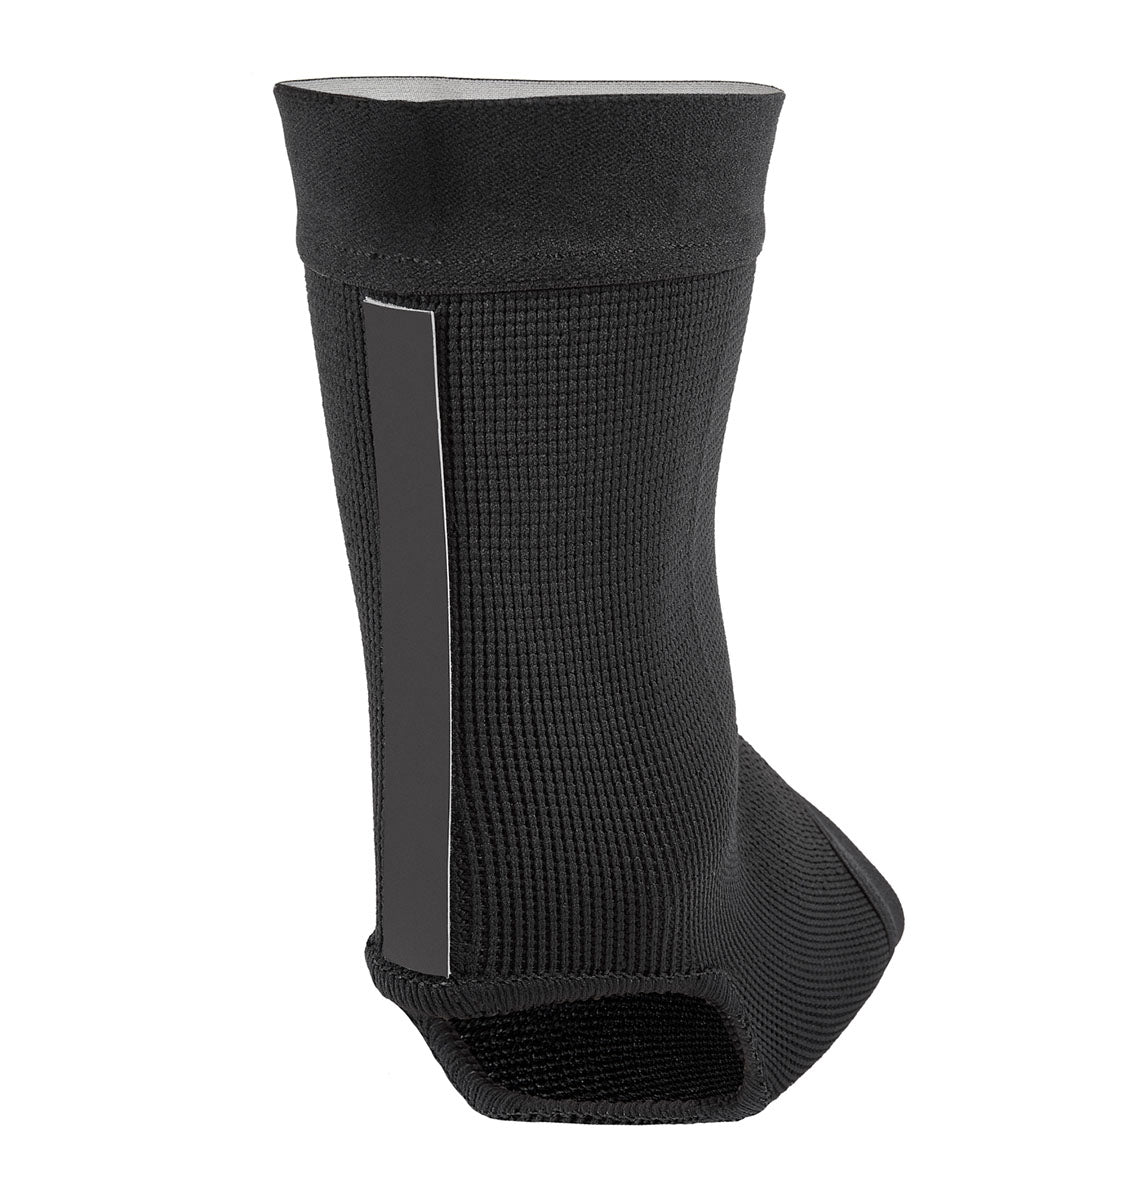 adidas Performance Climacool Ankle Support/Sleeve - Black - 5